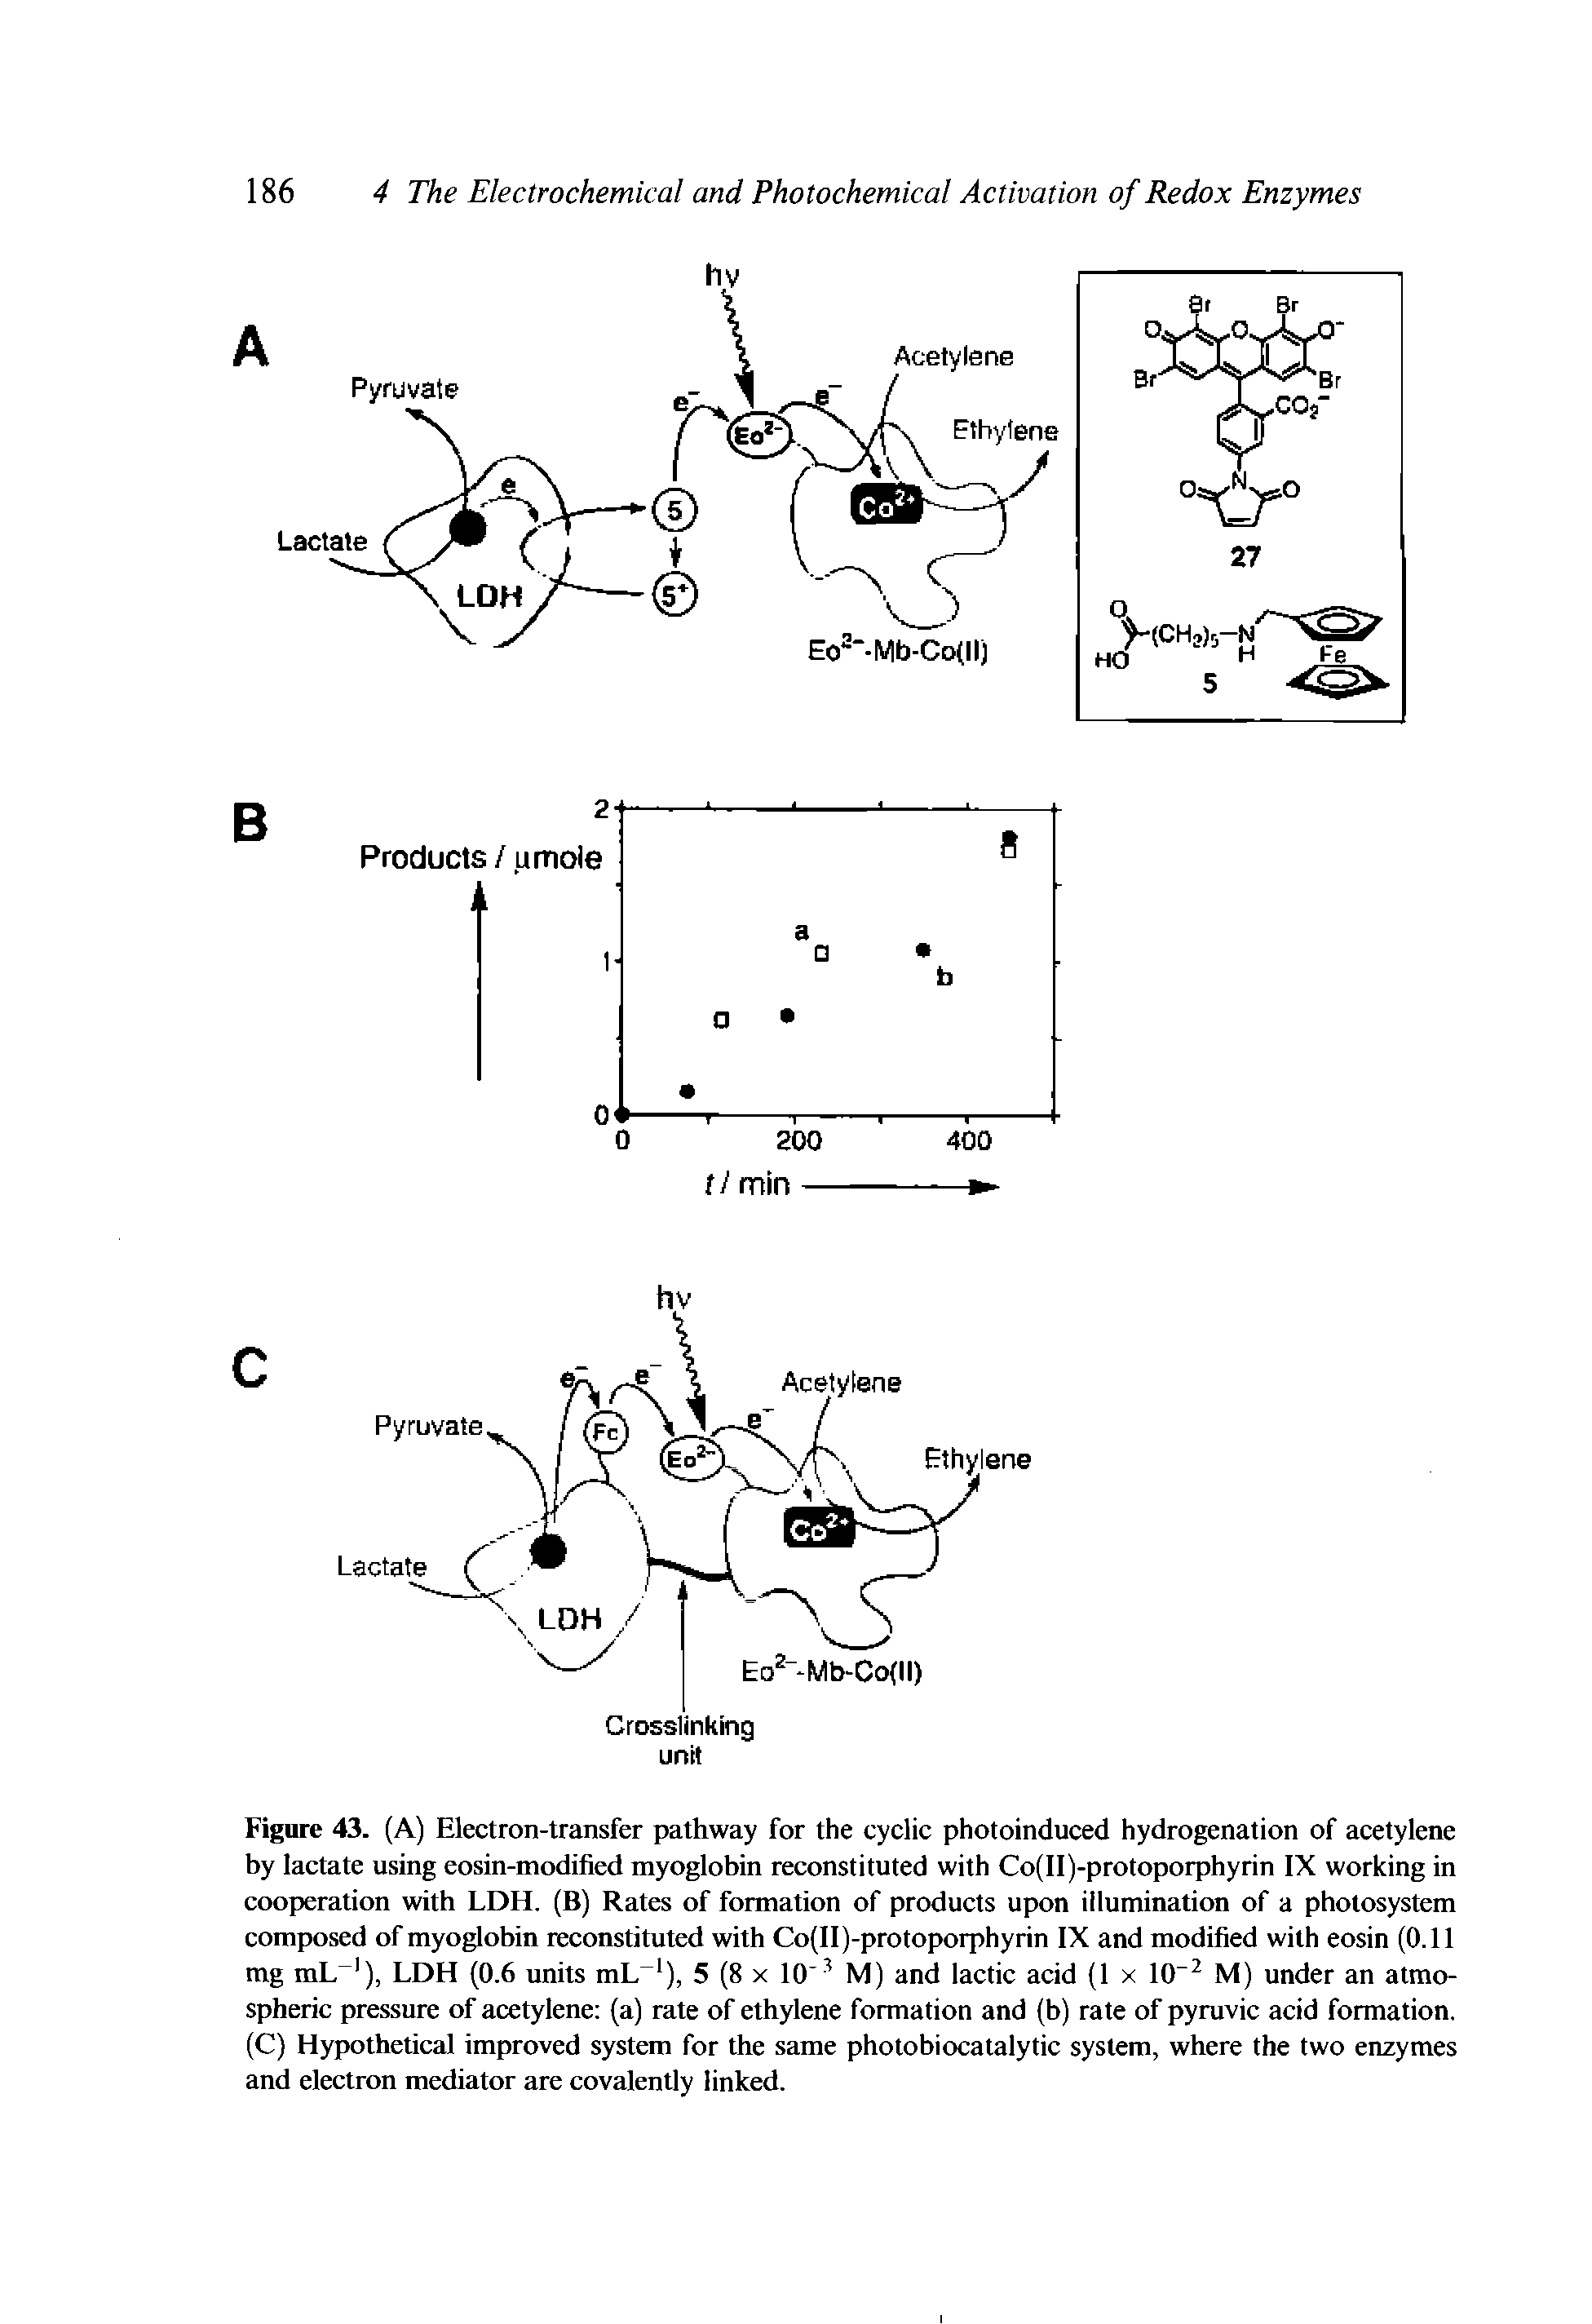 Figure 43. (A) Electron-transfer pathway for the cyclic photoinduced hydrogenation of acetylene by lactate using eosin-modified myoglobin reconstituted with Co(II)-protoporphyrin IX working in cooperation with LDH. (B) Rates of formation of products upon illumination of a photosystem composed of myoglobin reconstituted with Co(II)-protoporphyrin IX and modified with eosin (0.11 mg mL ), LDH (0.6 units mL ), 5 (8 x 10 M) and lactic acid (1 x 10 M) under an atmospheric pressure of acetylene (a) rate of ethylene formation and (b) rate of pyruvic acid formation. (C) Hypothetical improved system for the same photobiocatalytic system, where the two enzymes and electron mediator are covalently linked.